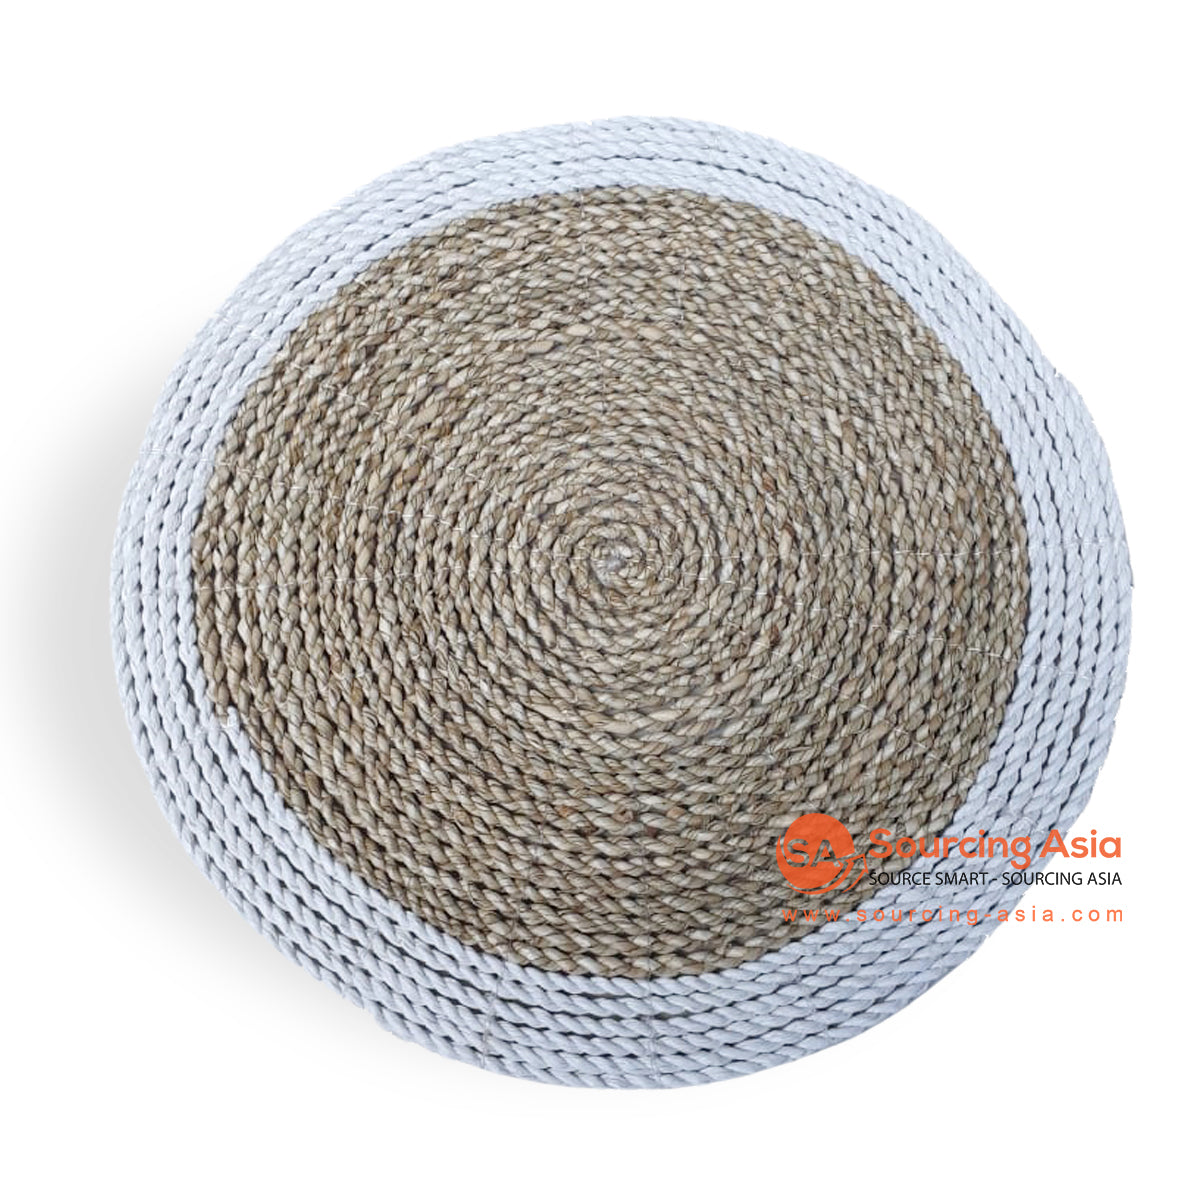 HBS071 WHITE AND NATURAL ROUND SEAGRASS PLACEMAT